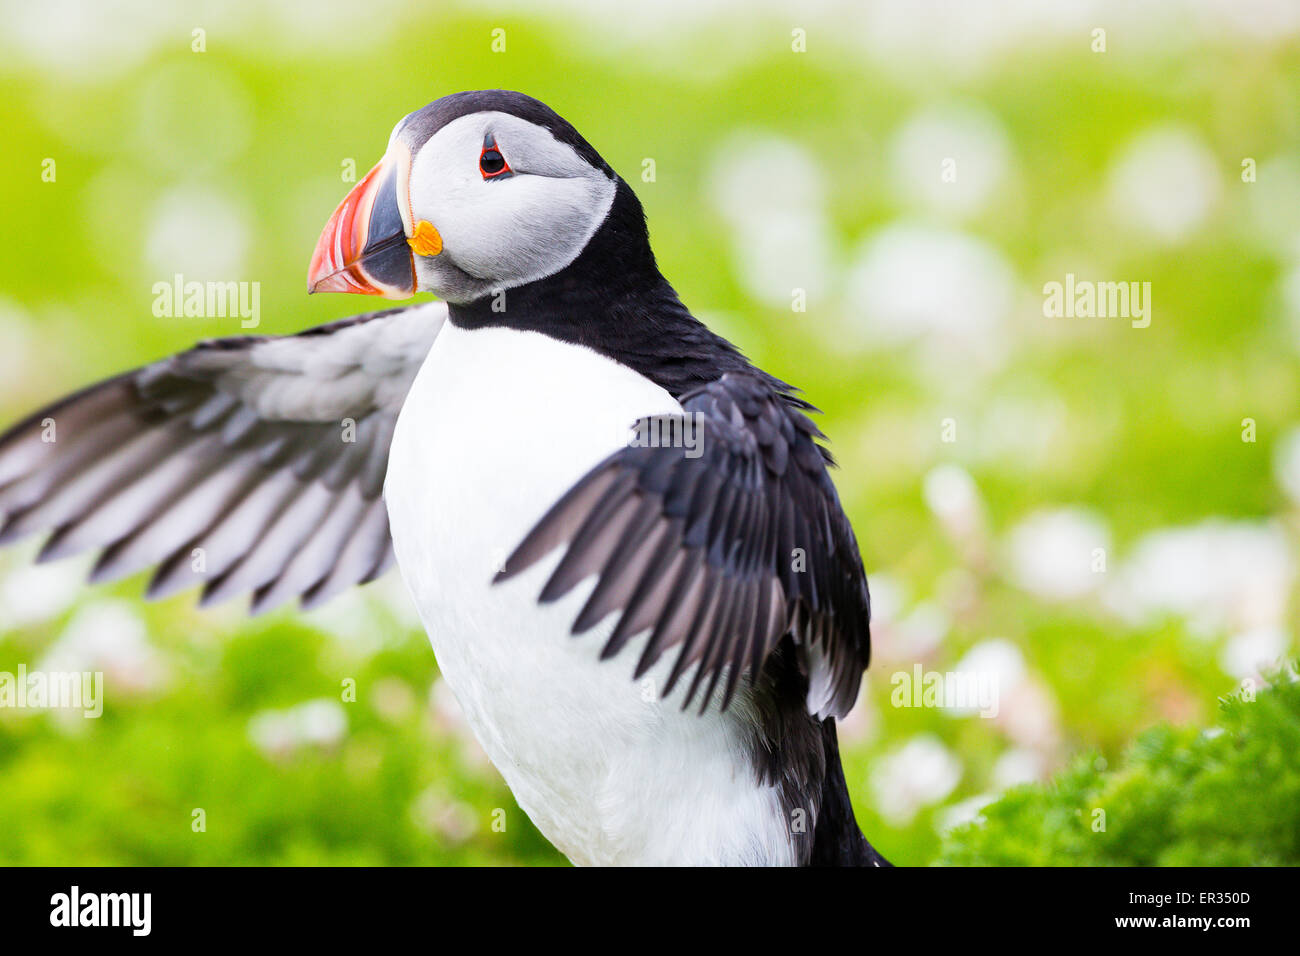 Pembrokeshire, Wales, UK. 24th May, 2015. Atlantic puffin stretching its wings. Biologists have announced record numbers of Atlantic puffins living on Skomer. Over 21,000 individuals have been counted on the island. Puffins can be visited on Skomer from May to mid-July, with 500 people per day able to visit the small island off the west coast of Wales. Photographer comment: 'I've been photographing puffins on Skomer for years and they never cease to entertain, challenge, and infuriate. Credit:  Dave Stevenson/Alamy Live News Stock Photo